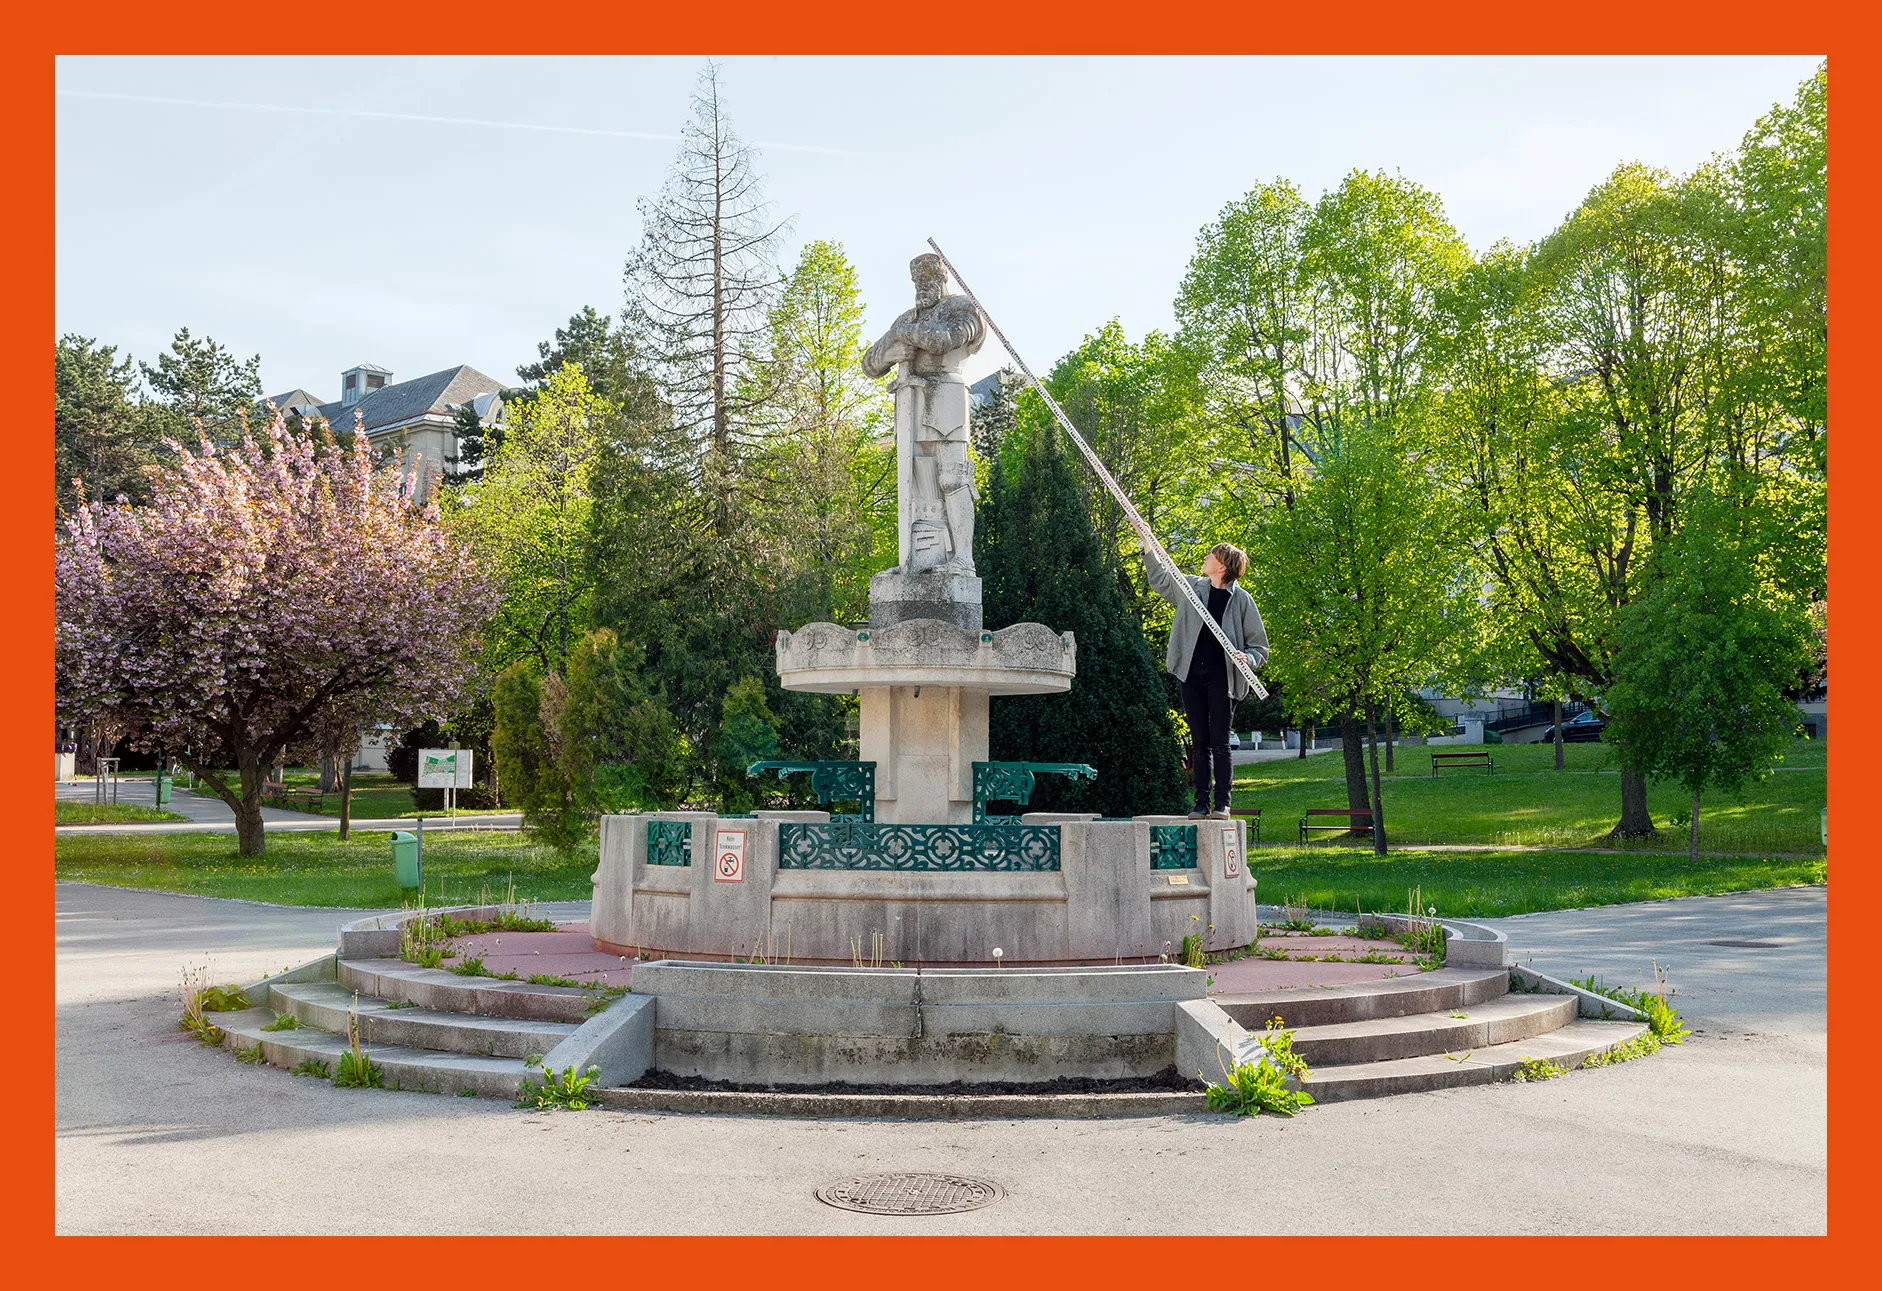 1913 Roland Fountain, Lainz, 13th district – uncommented